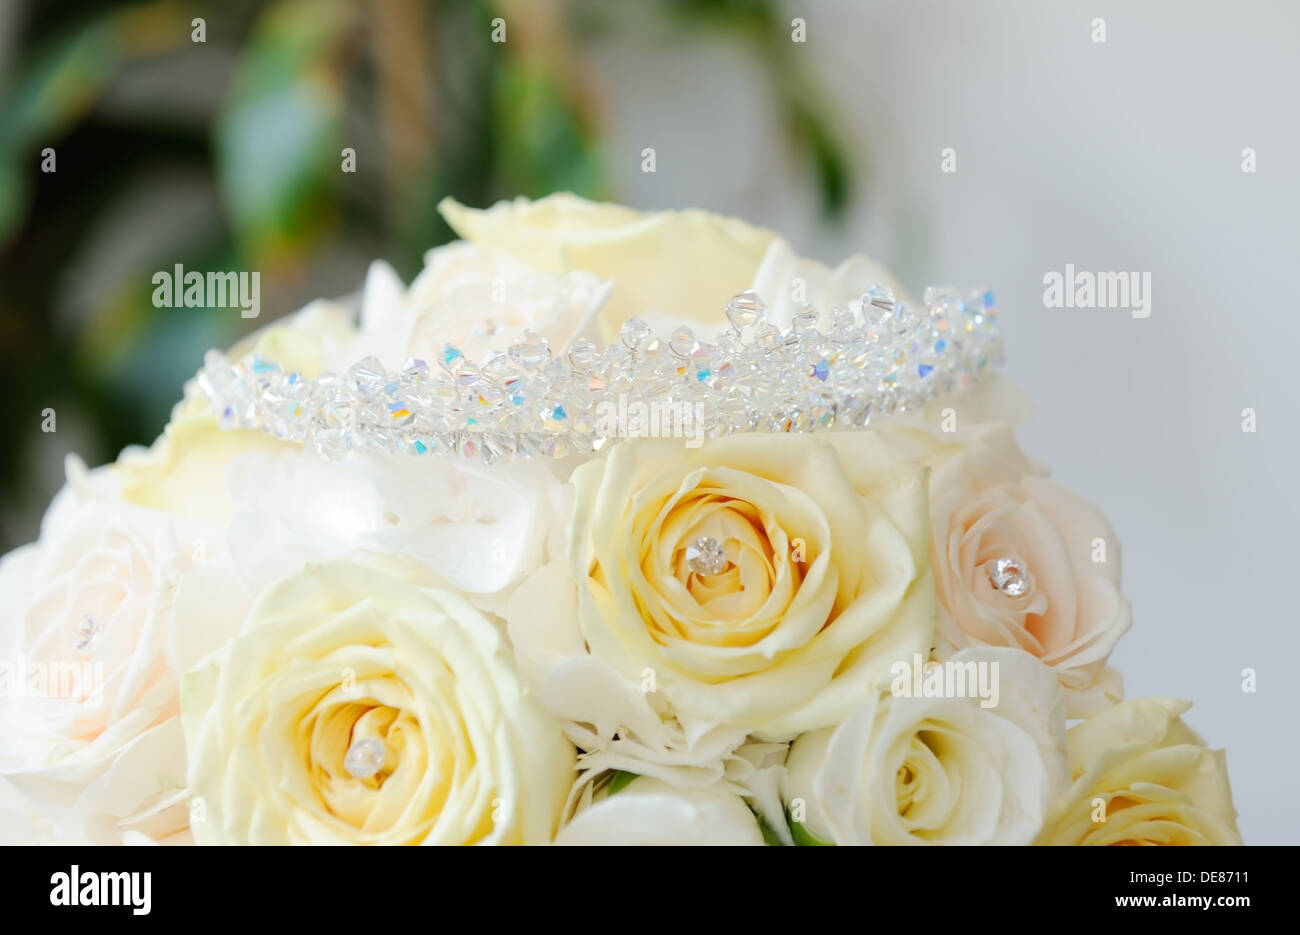 Brides bunch of yellow roses with closeup of tiara showing detail Stock Photo